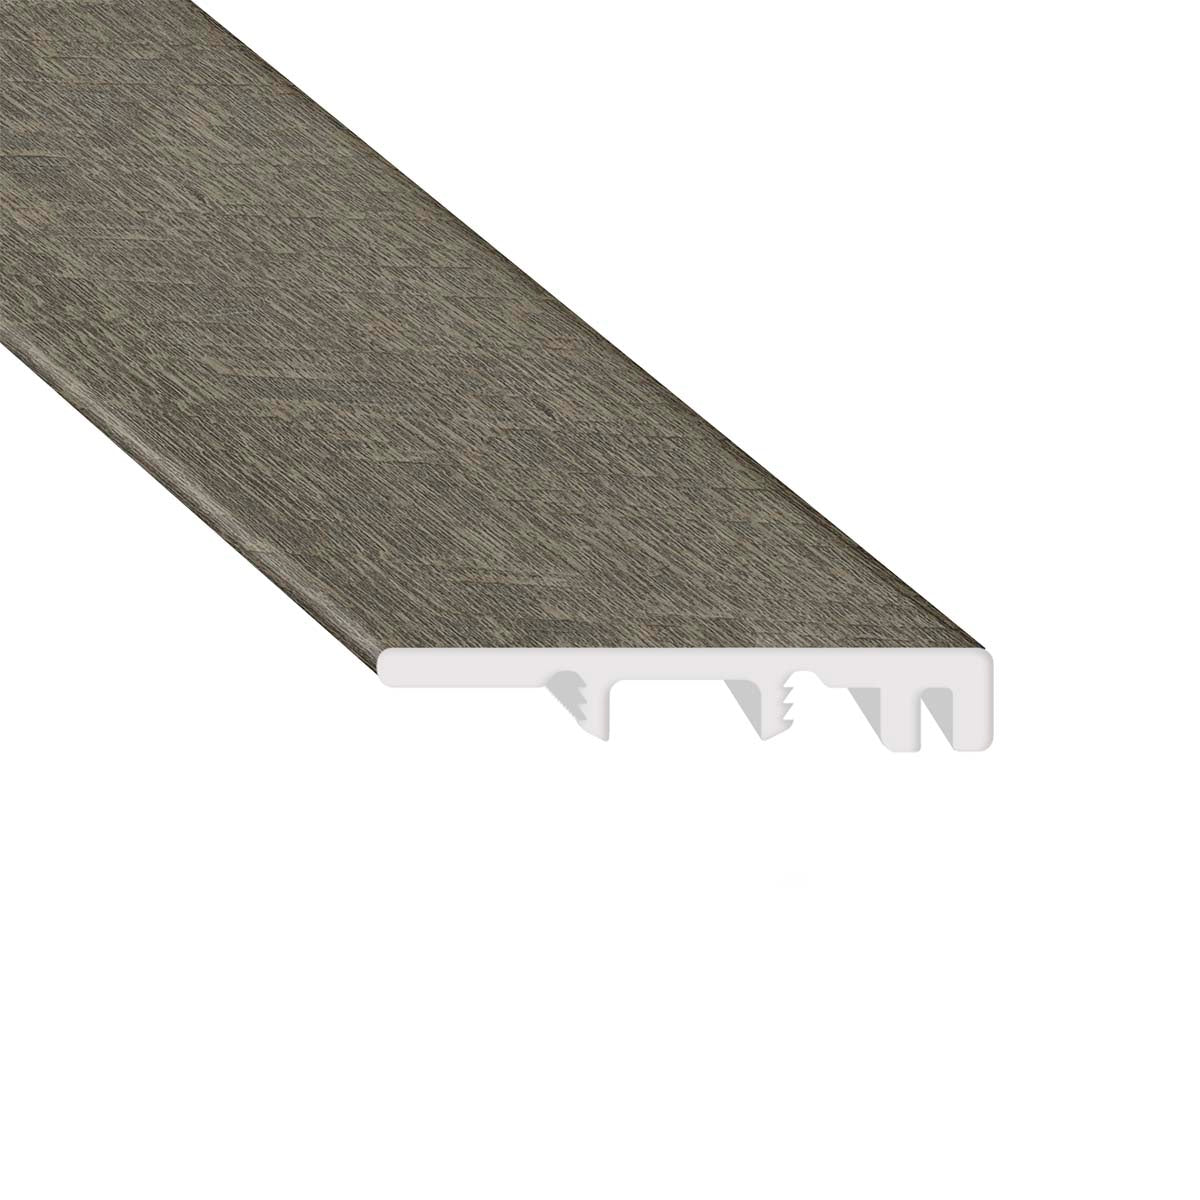 Silver Creek 0.25 in. Thick x 1.5 in. Width x 94 in. Length Vinyl End Molding